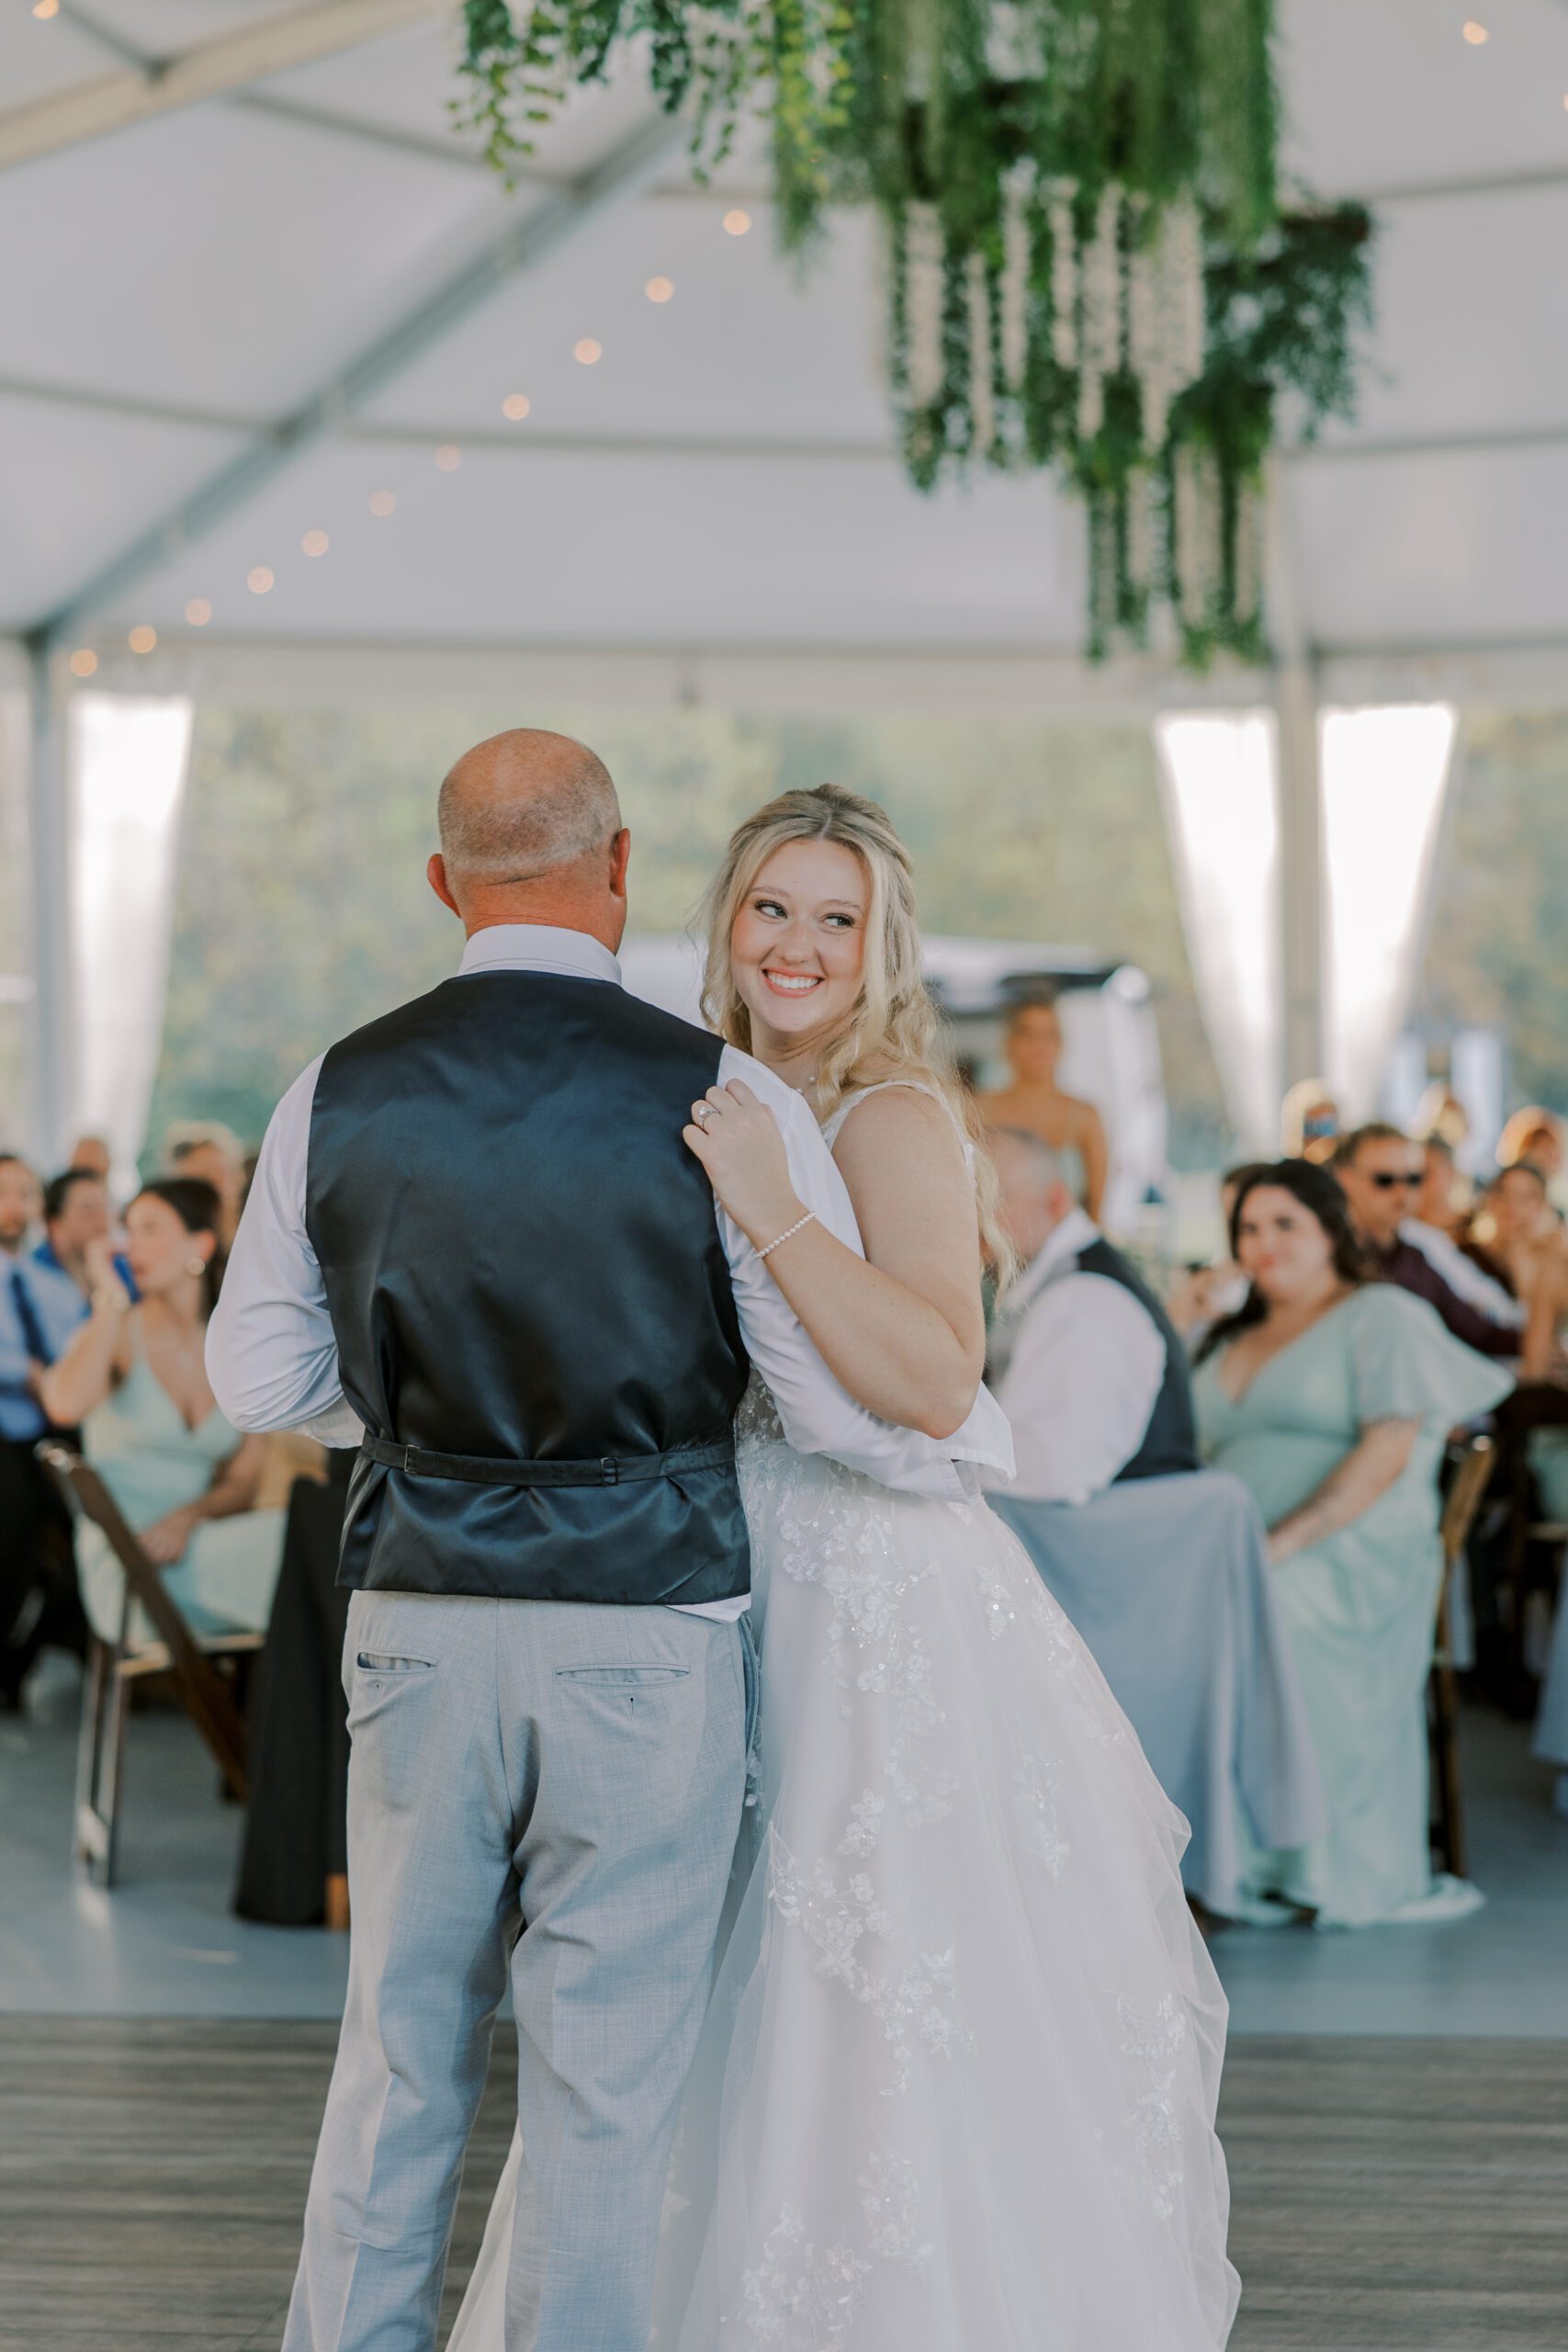 Bride dancing with her father, who is facing away from camera. Bride looks off to the side smiling, guests behind them sitting at tables